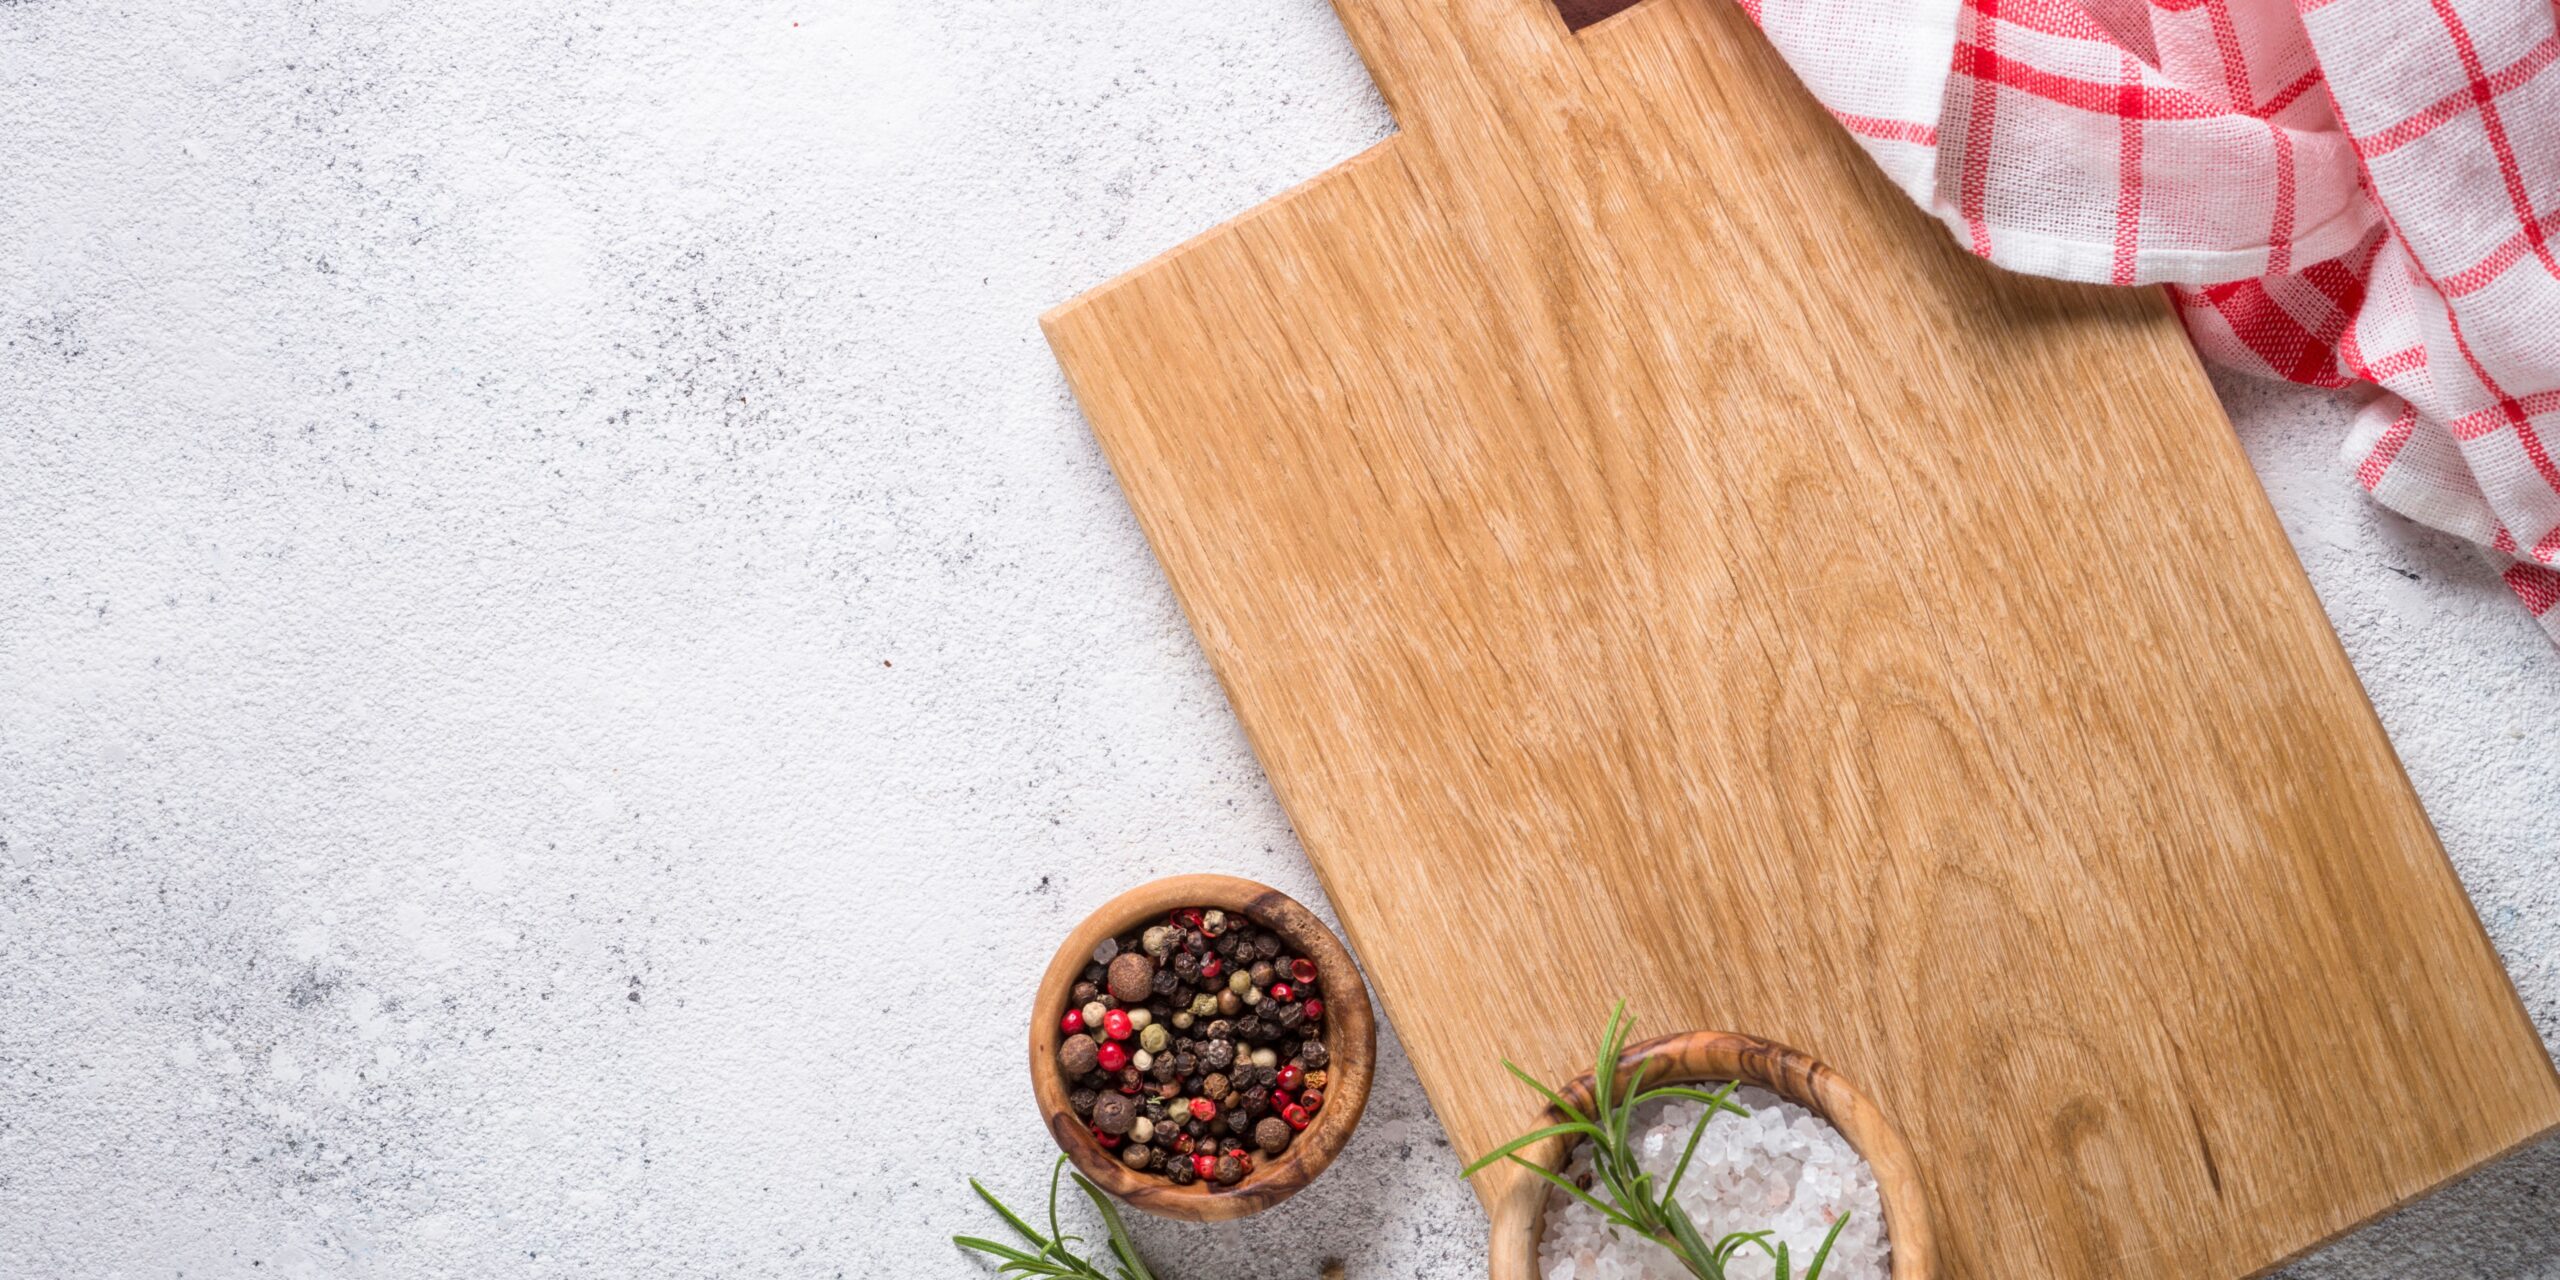 How To Clean a Wooden Cutting Board